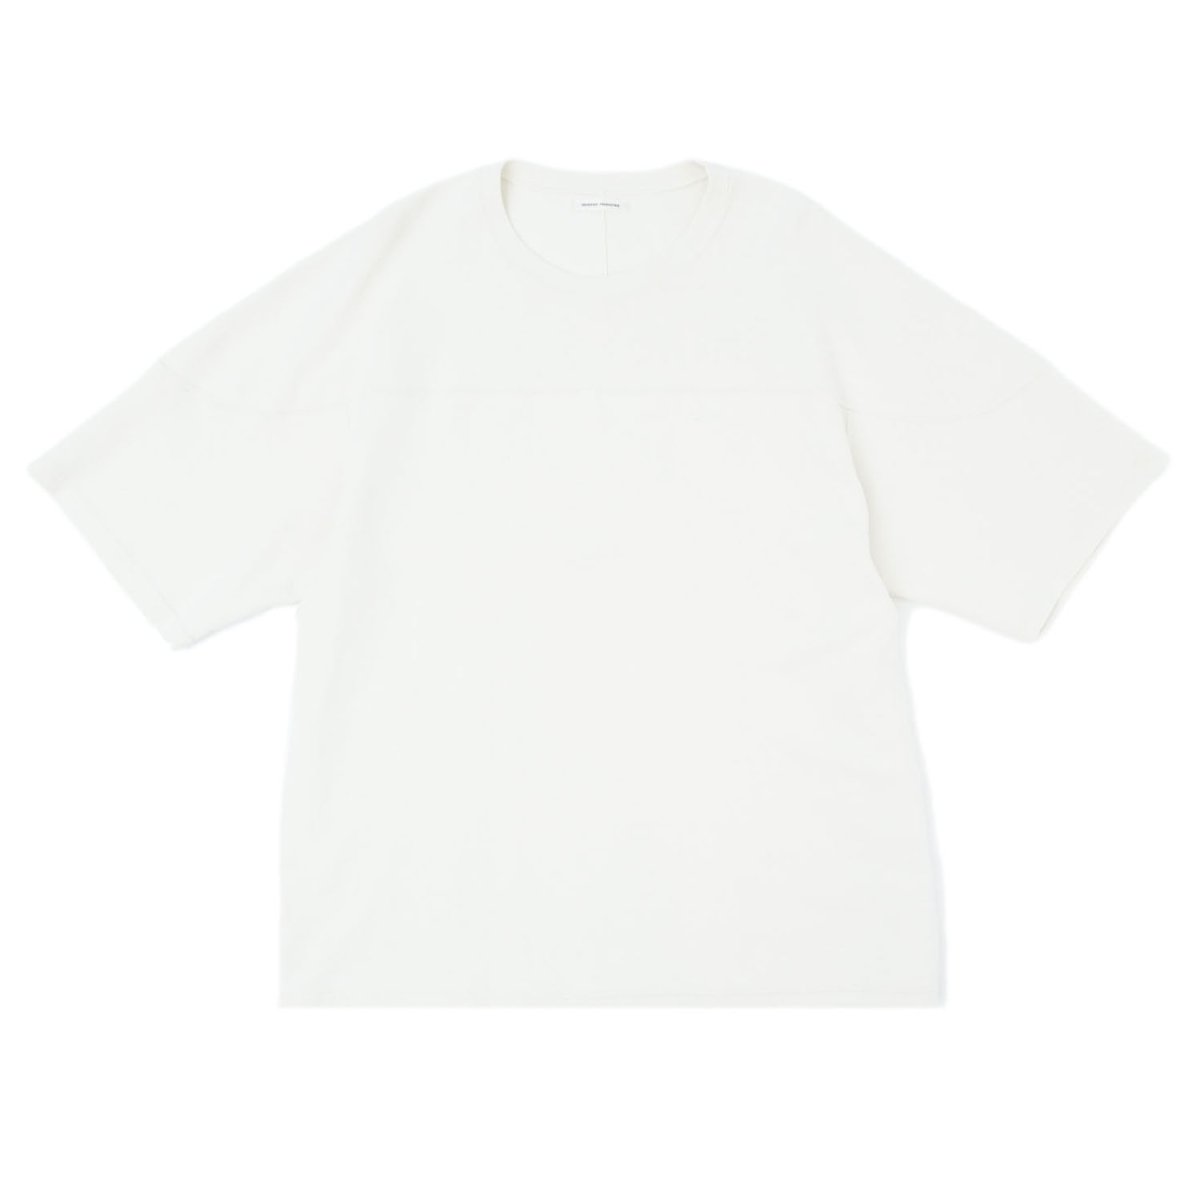 UNIVERSAL<BR>PRODUCTS <BR>SURF-KNIT FOOTBALL T-SHIRT
